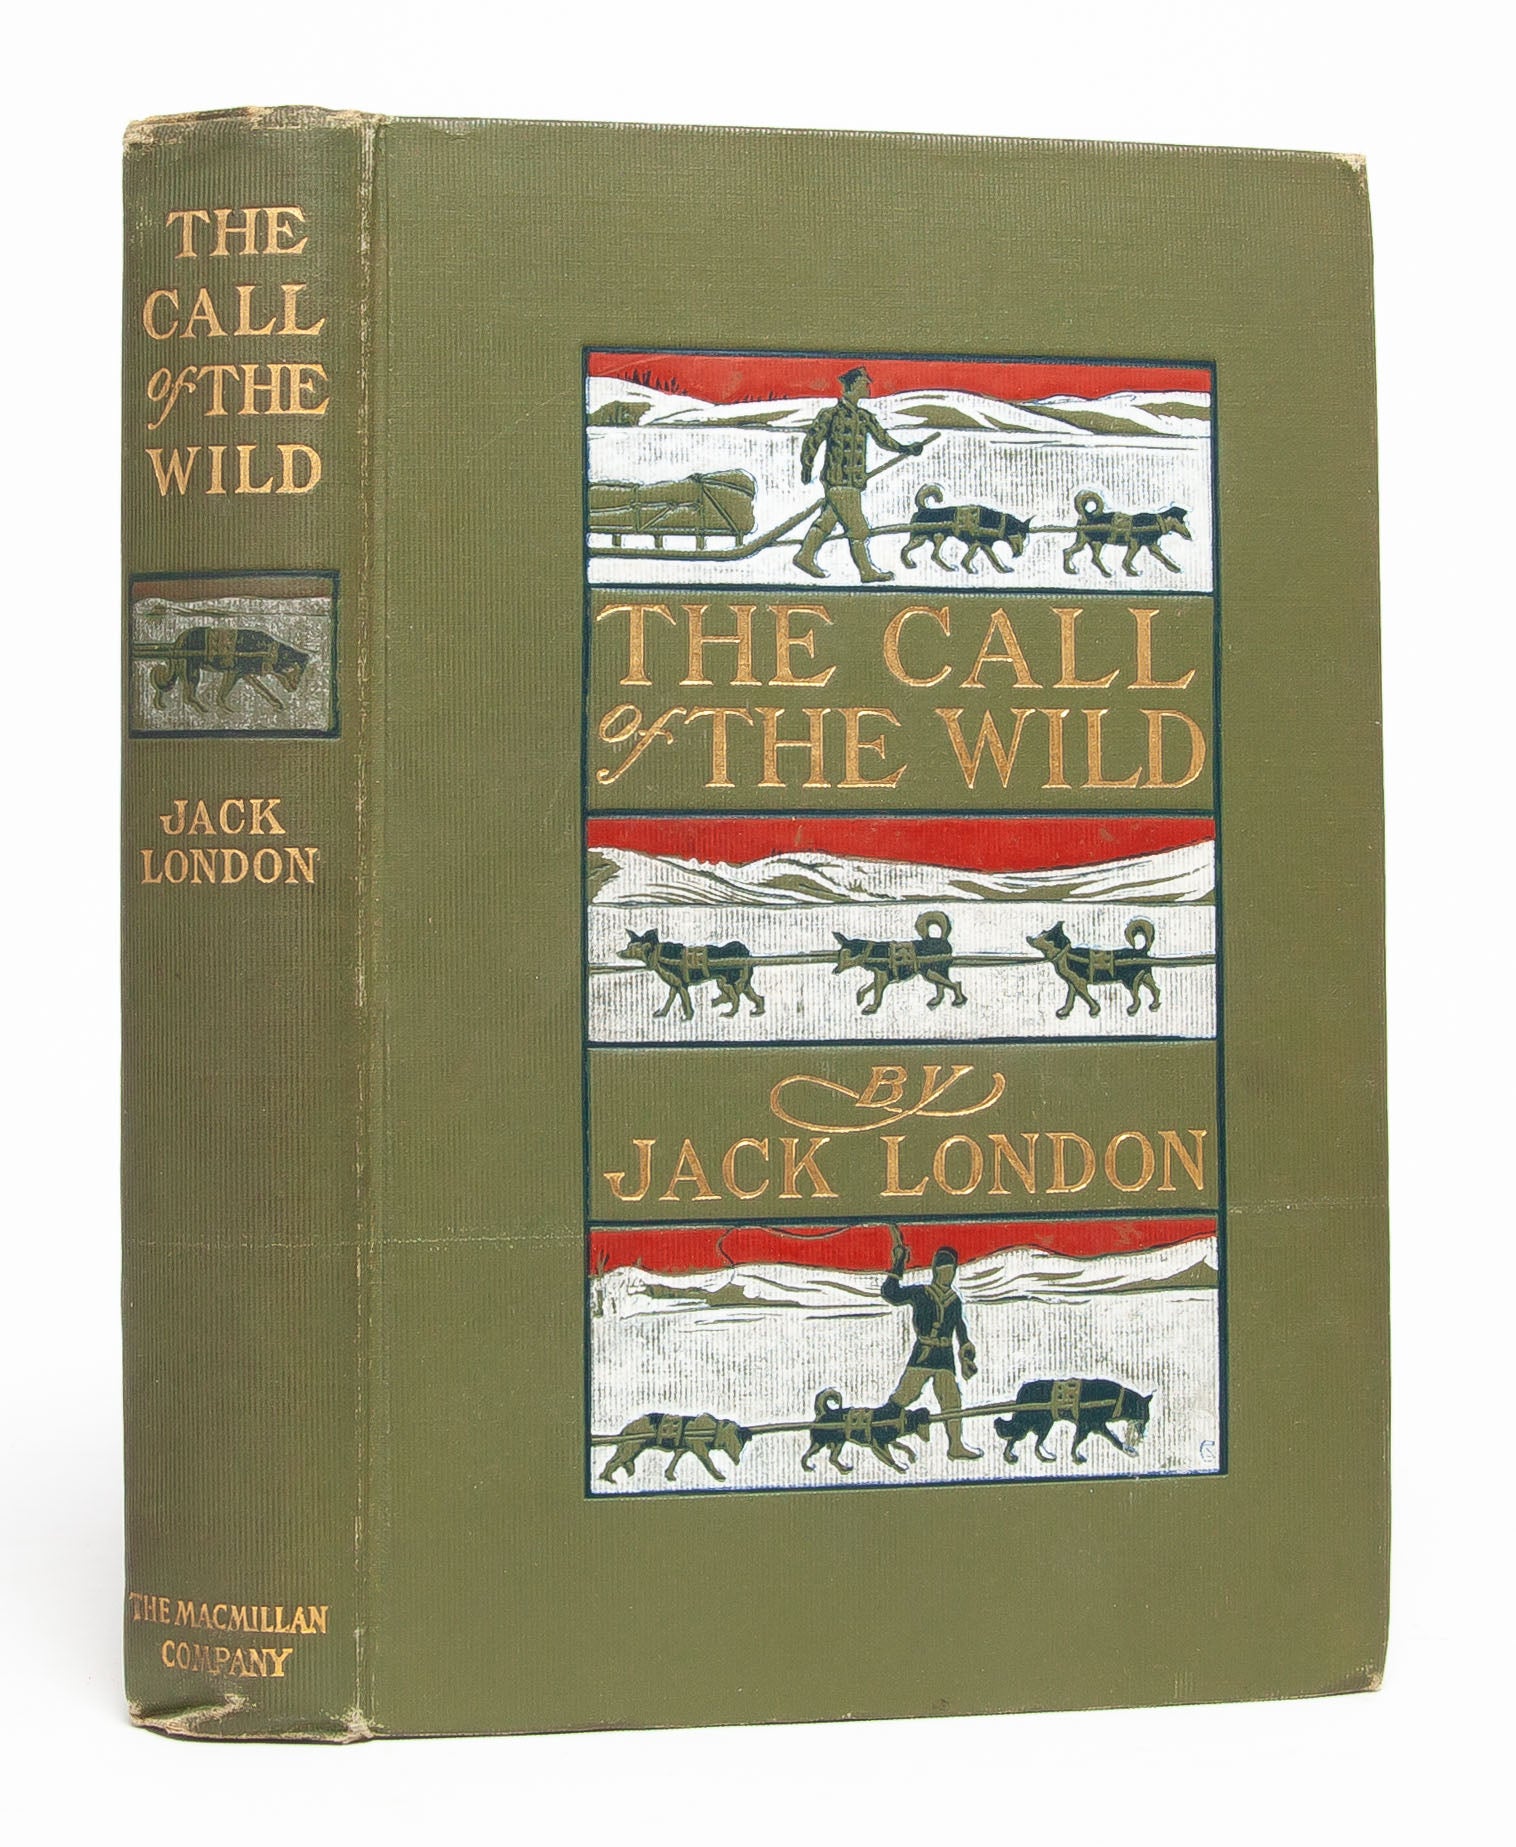 (Item #5591) The Call of the Wild. Jack London.